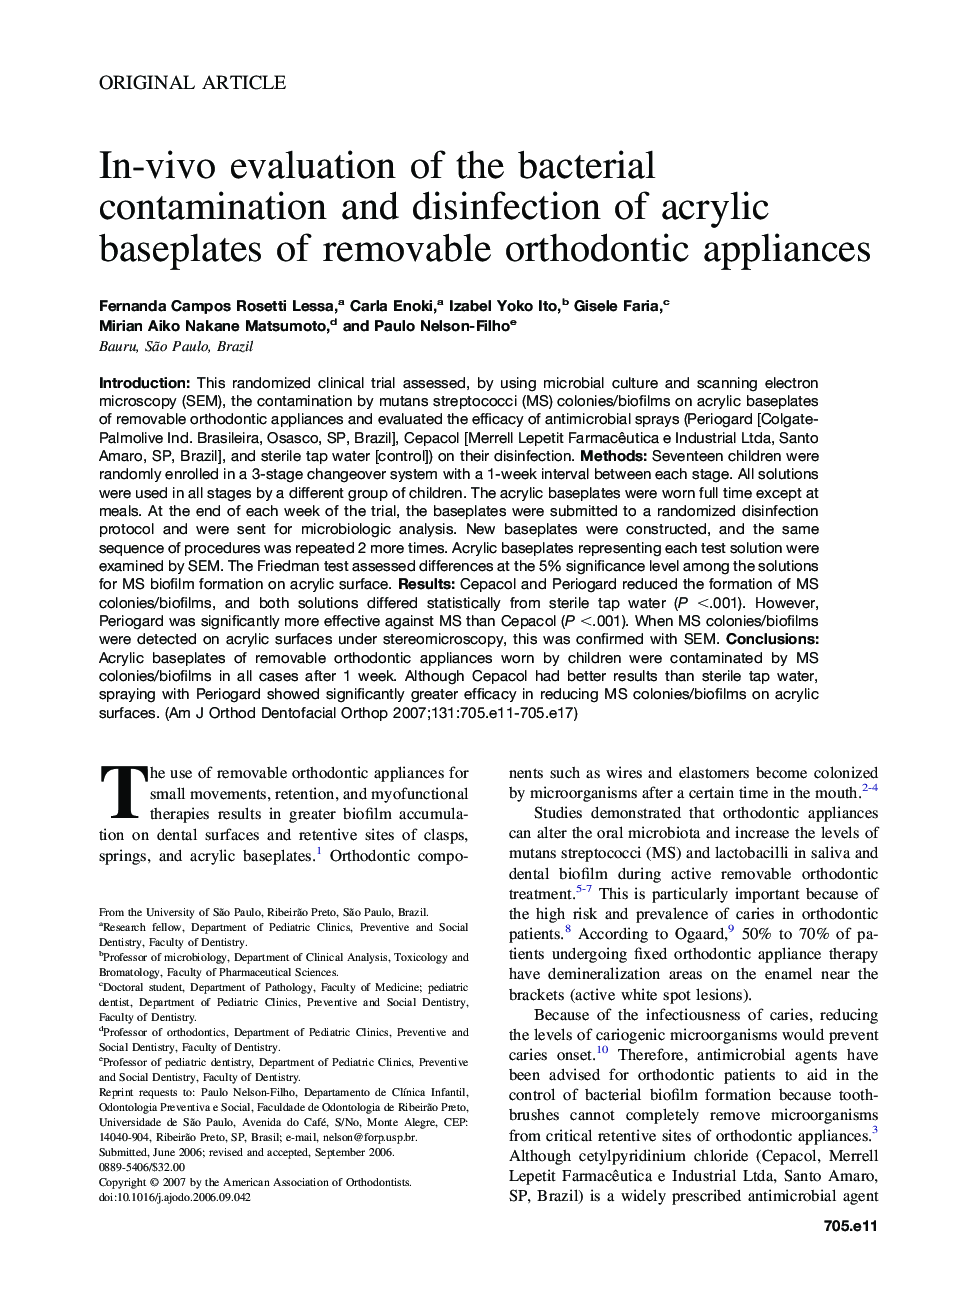 In-vivo evaluation of the bacterial contamination and disinfection of acrylic baseplates of removable orthodontic appliances